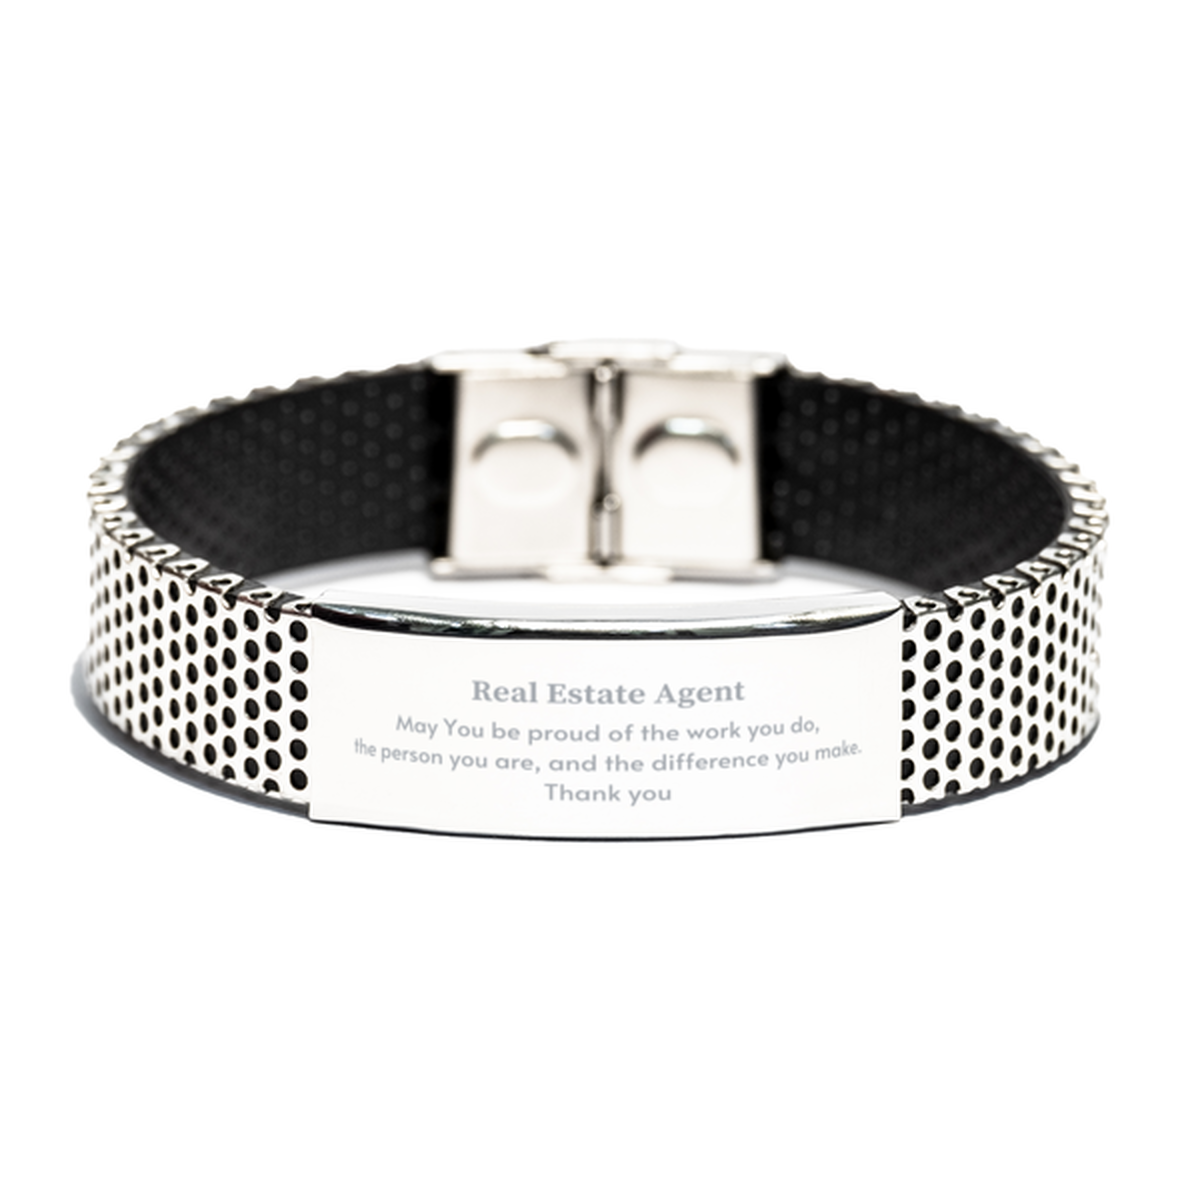 Heartwarming Stainless Steel Bracelet Retirement Coworkers Gifts for Real Estate Agent, Real Estate Agent May You be proud of the work you do, the person you are Gifts for Boss Men Women Friends